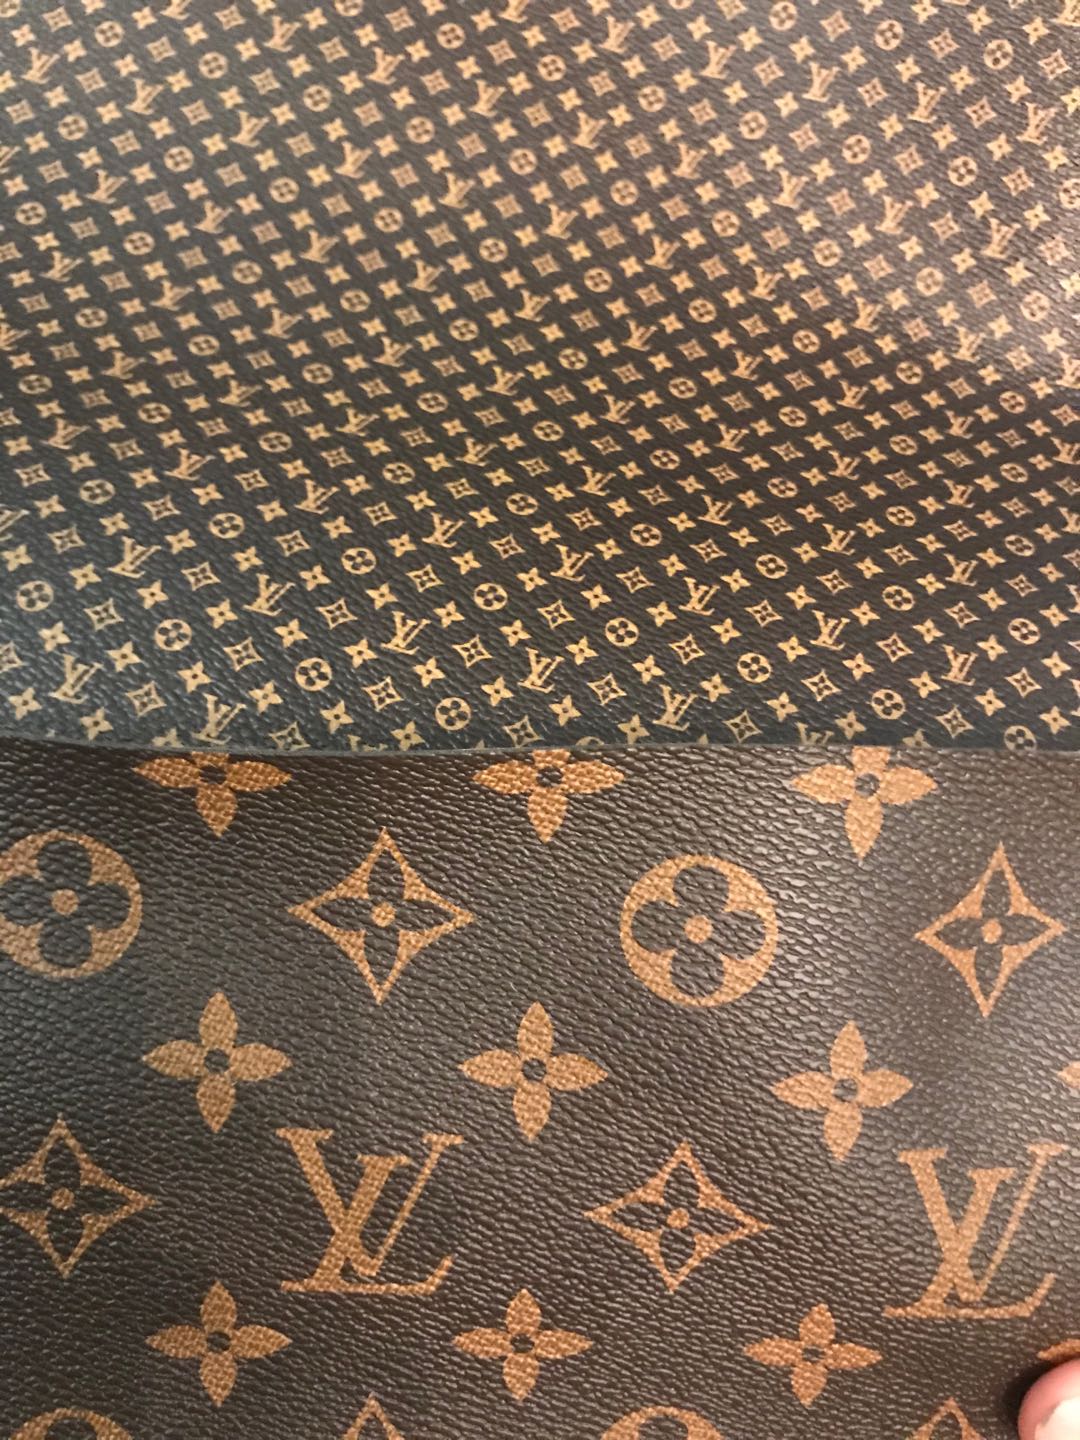 Elastic LV Leather Fabric  4 way stretching Louis Vuitton Fabric